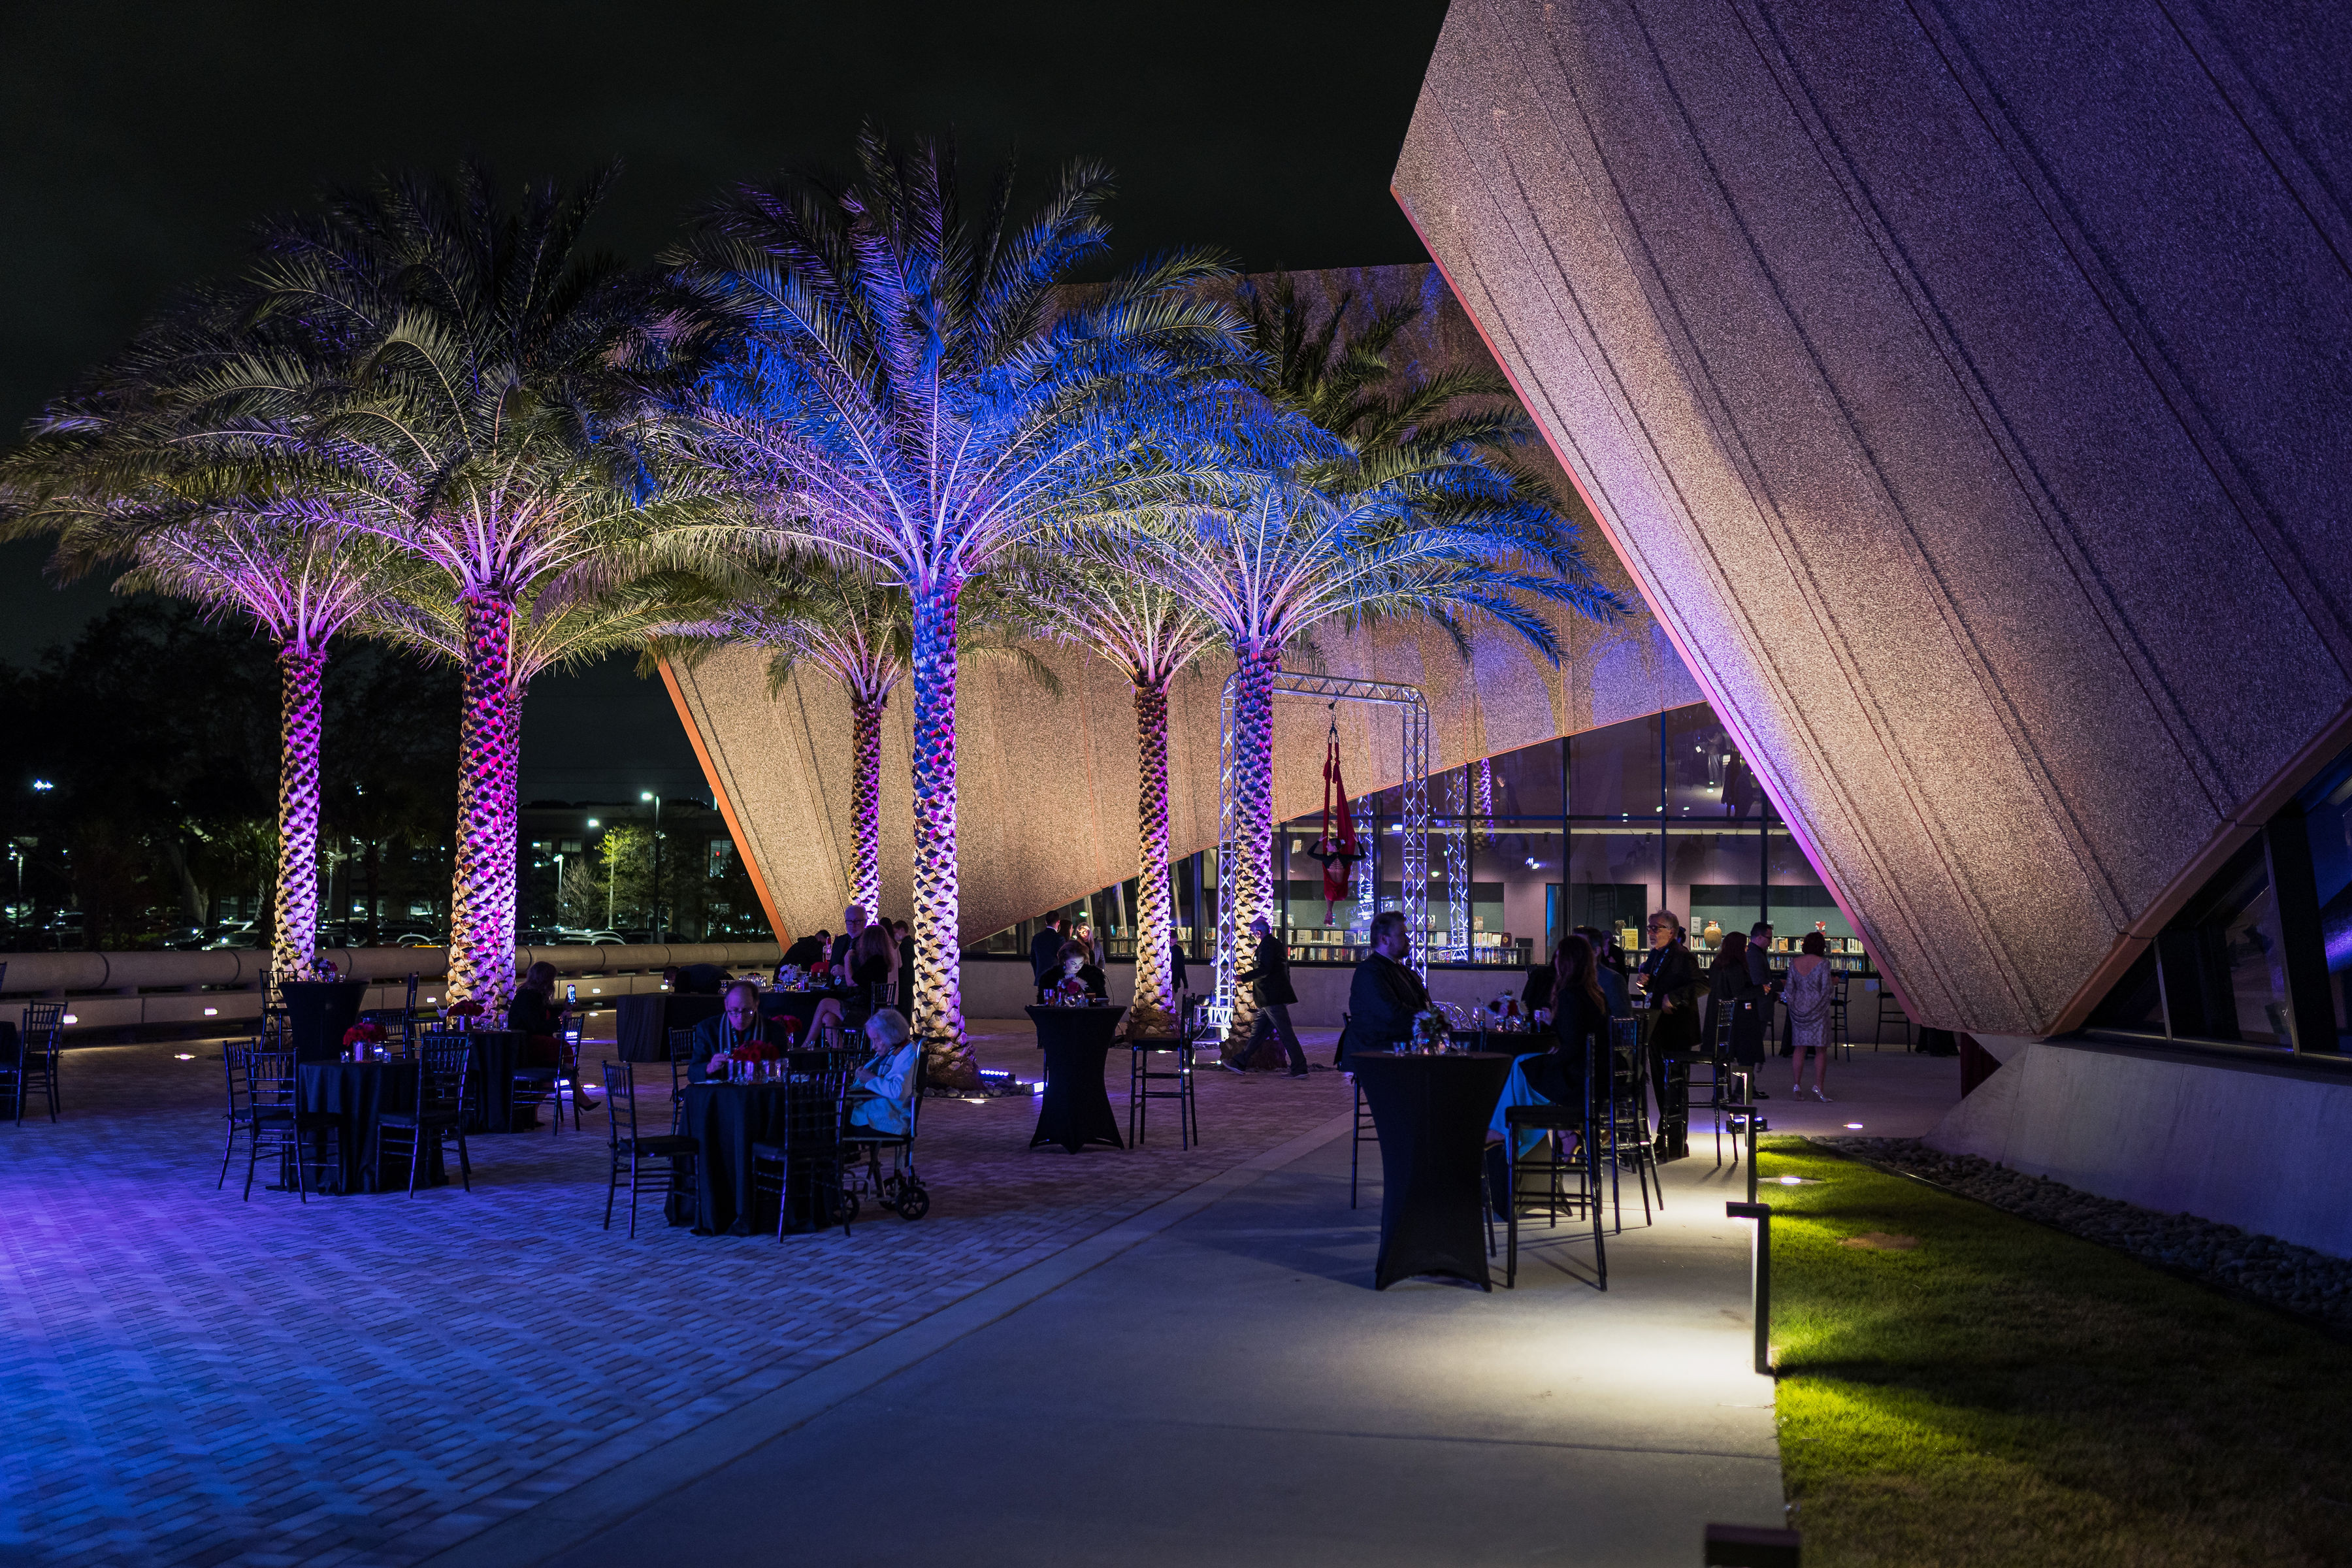 Gala image showing guests seated outside with lit palm trees